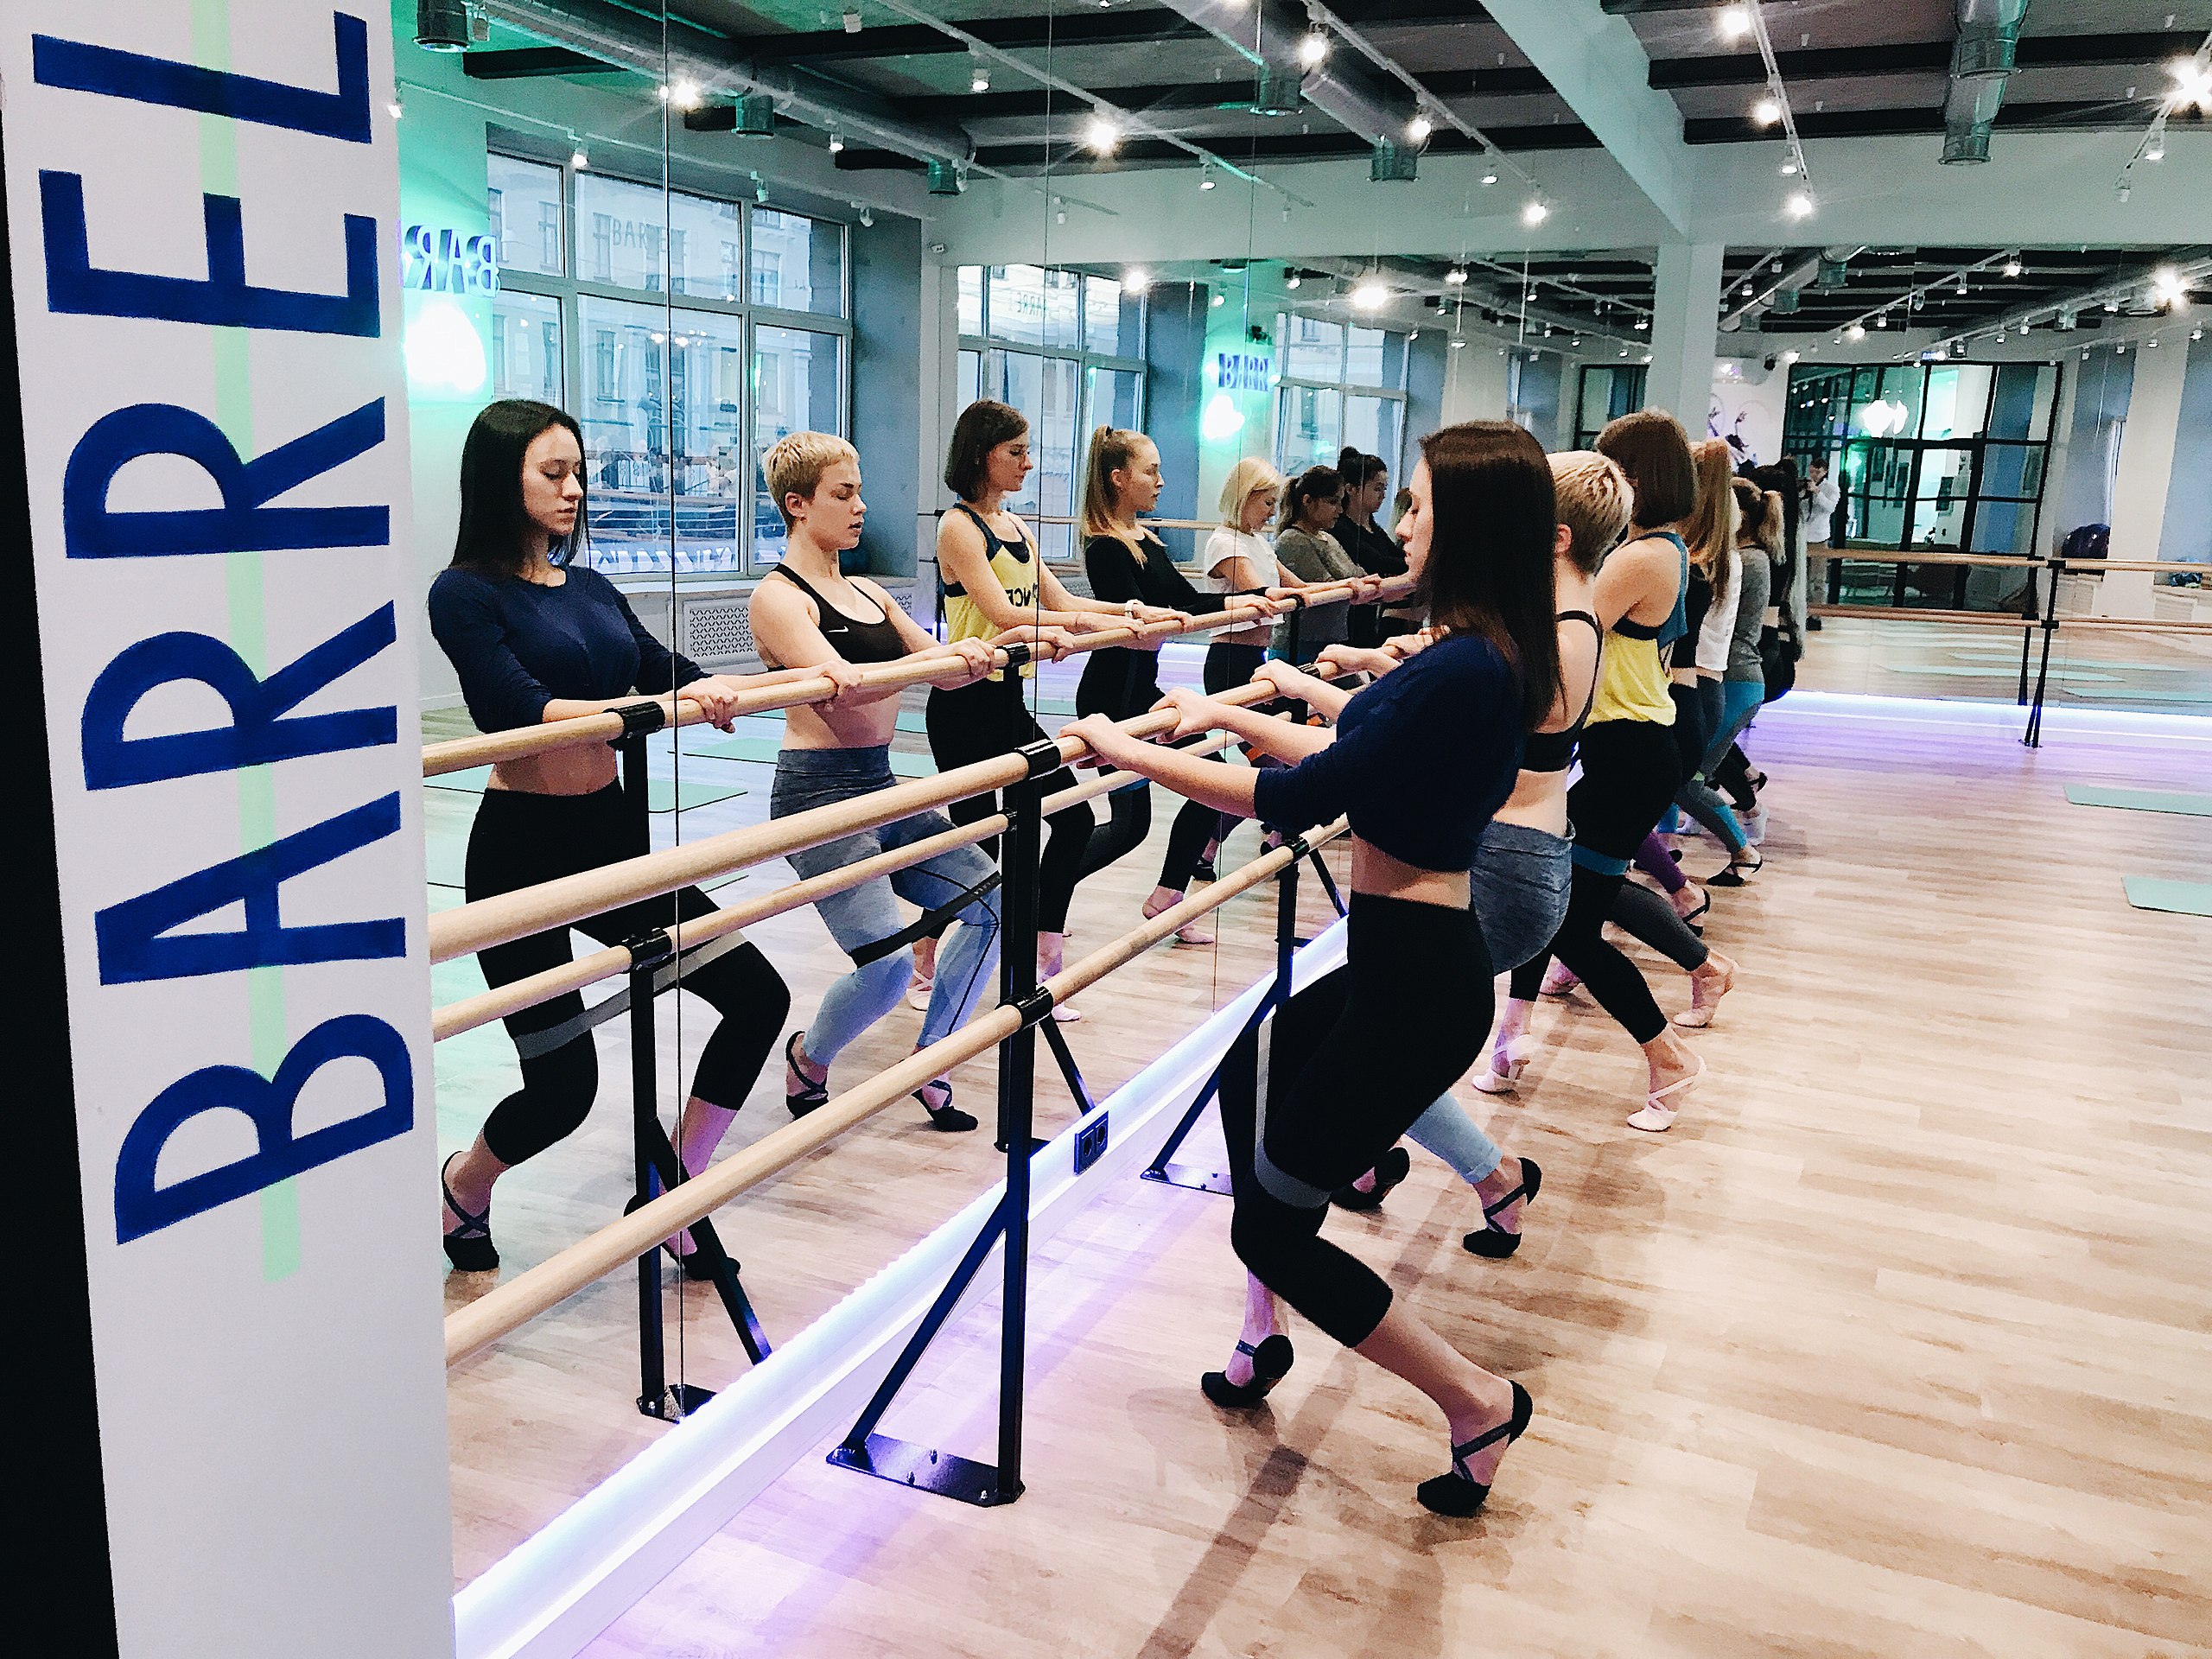 How does barre training help in the body contouring process?